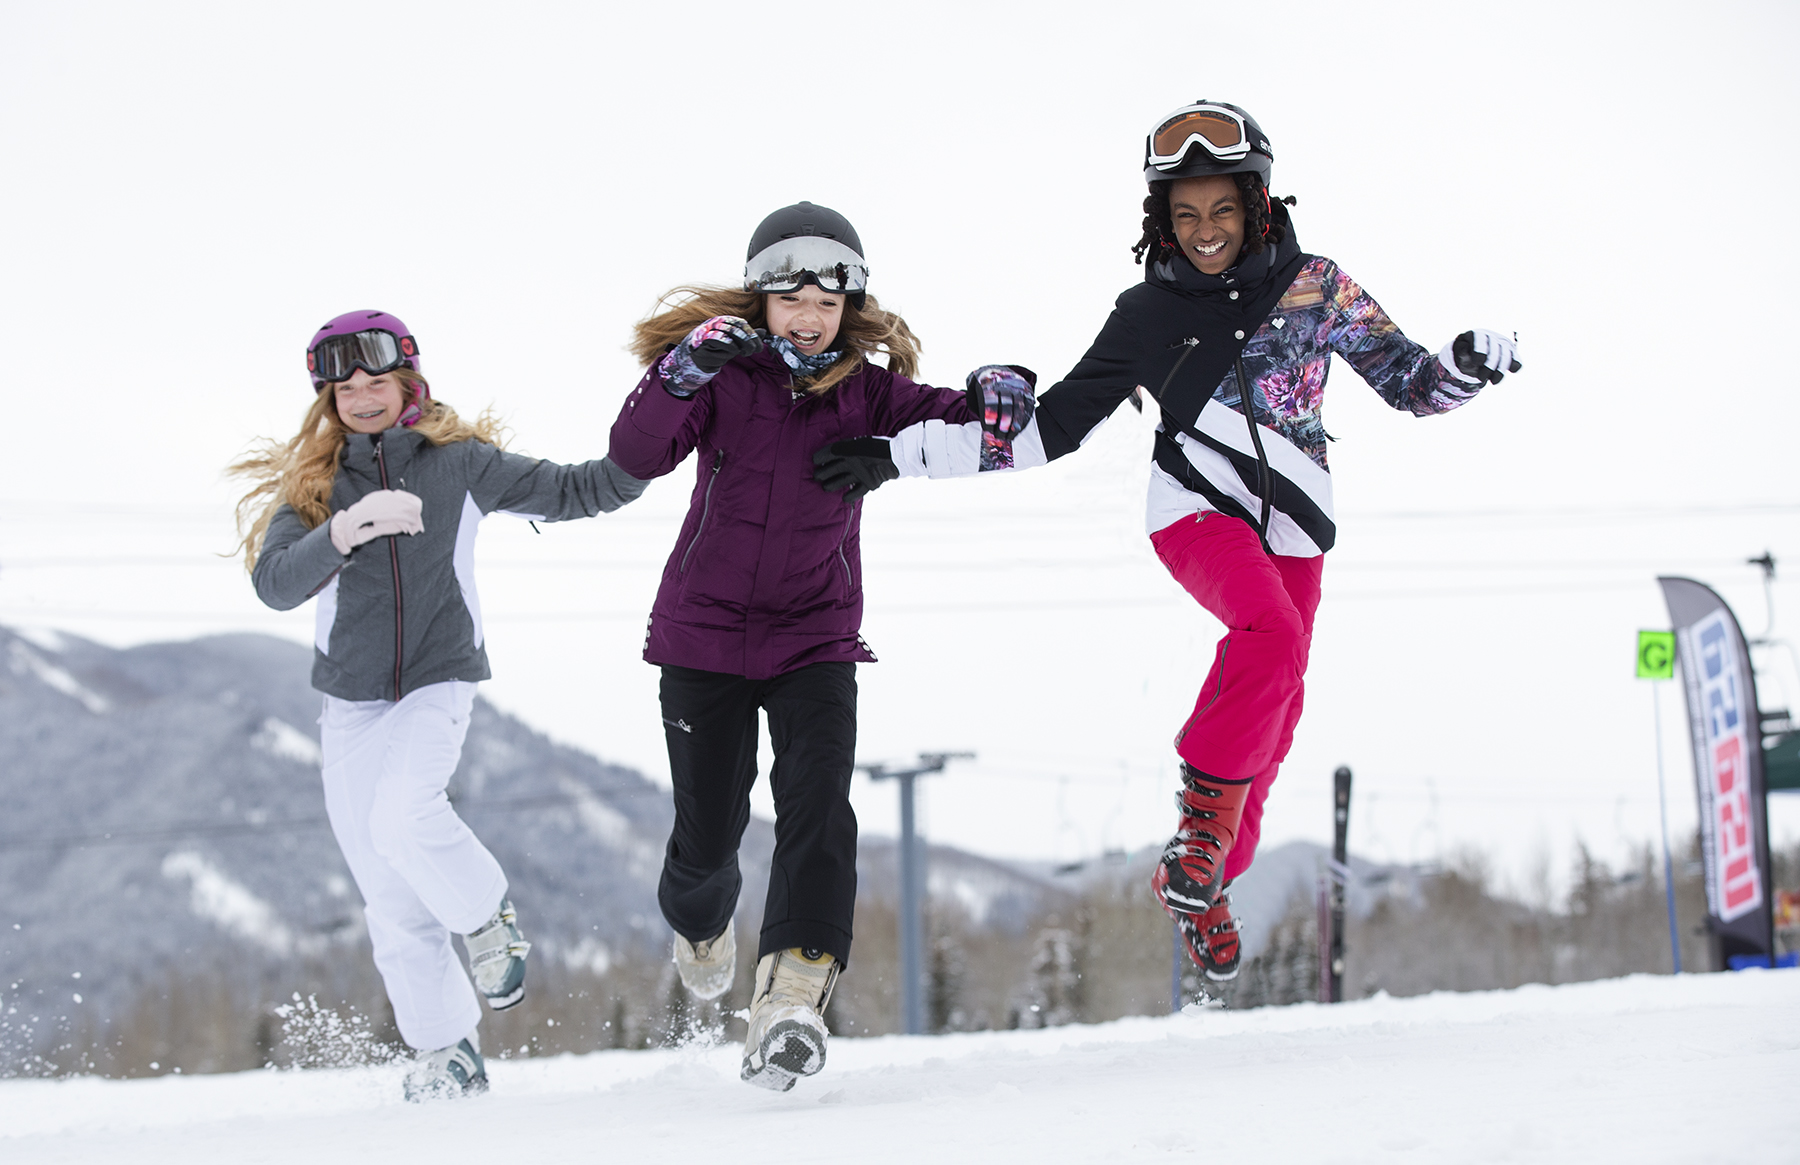 No Spring Break Plans Yet? Go Skiing and Snowboarding!